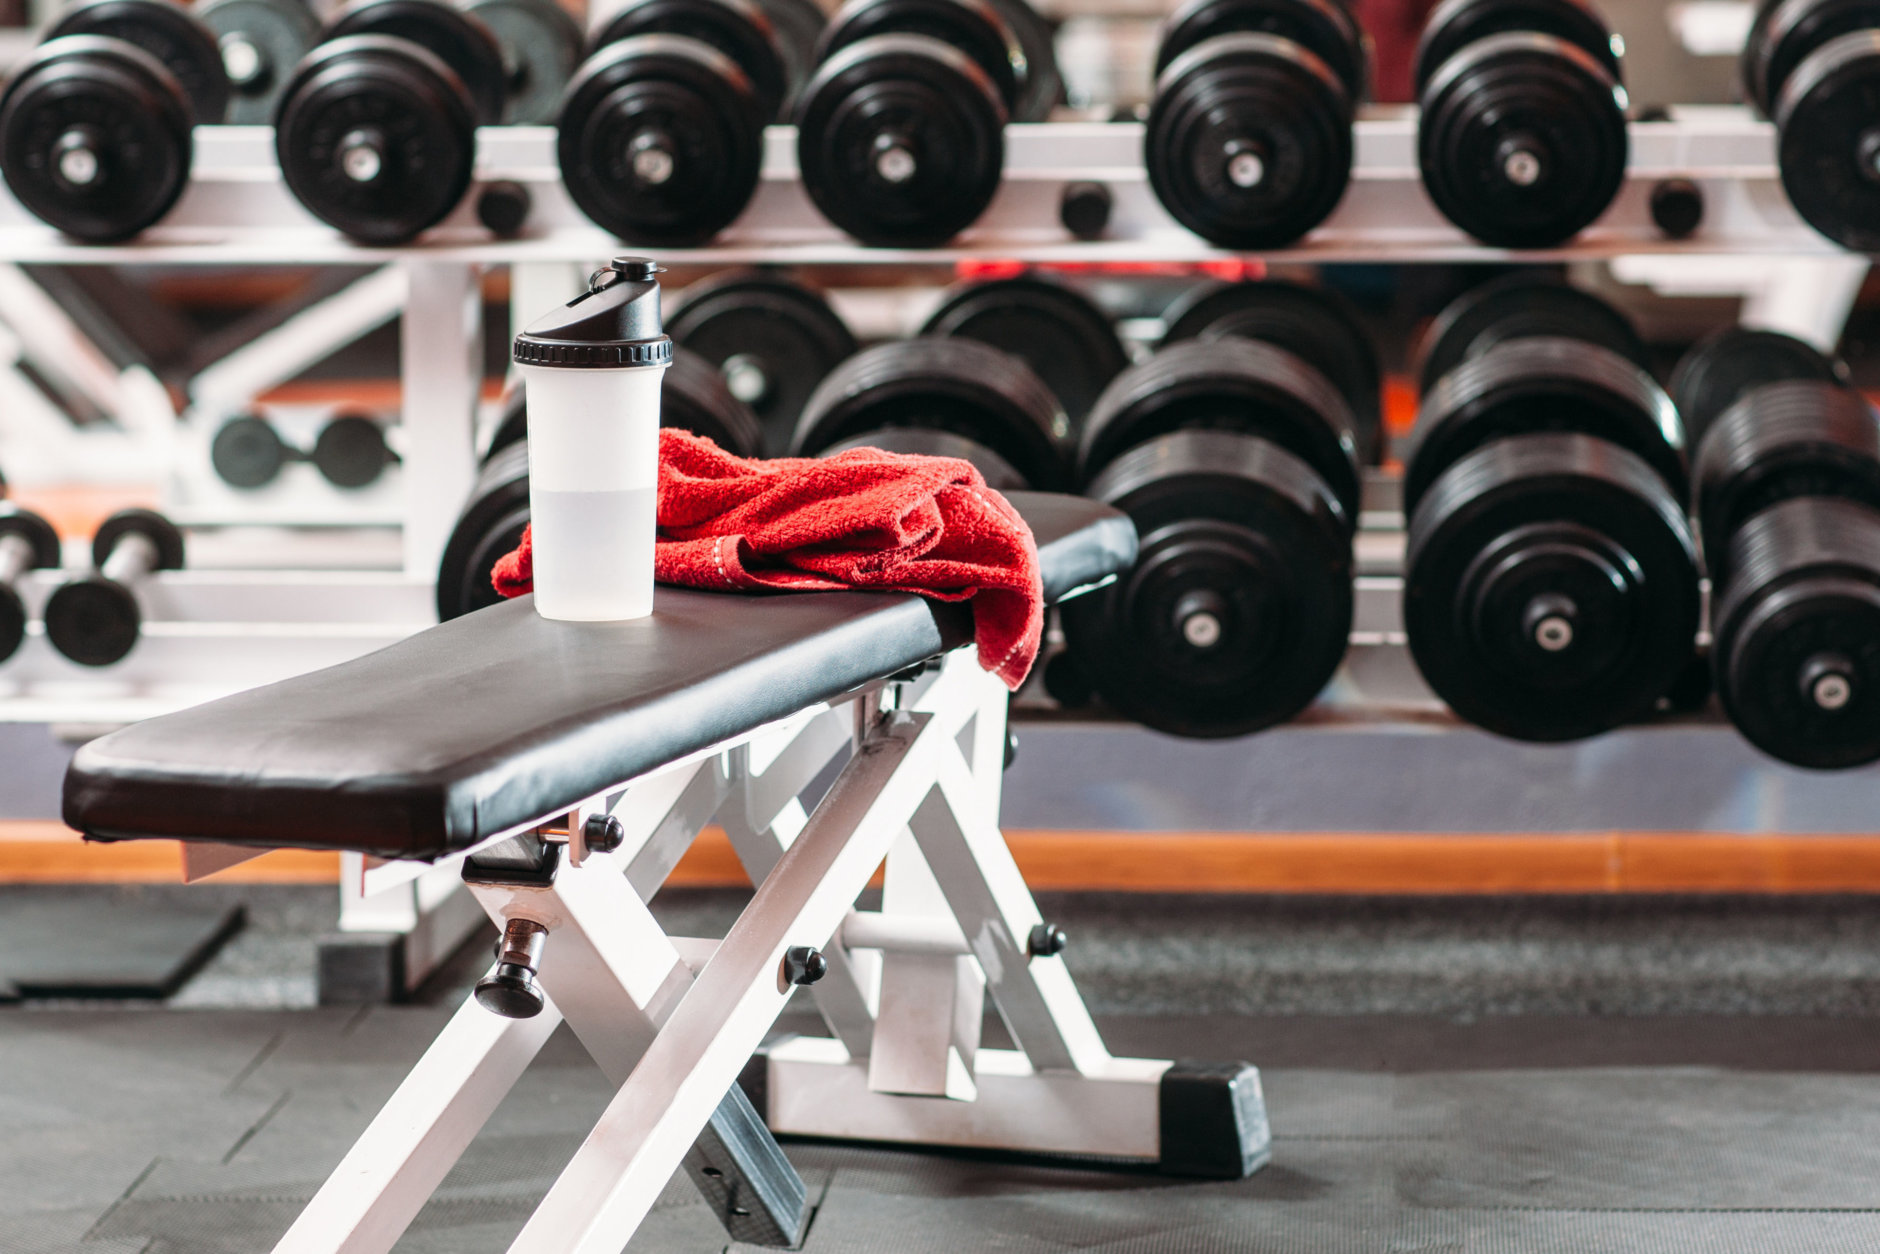 One of the best ways to kill that ongoing expense is to bring the exercise equipment you use most into your home. But exercise equipment can be costly. (Getty Images) 